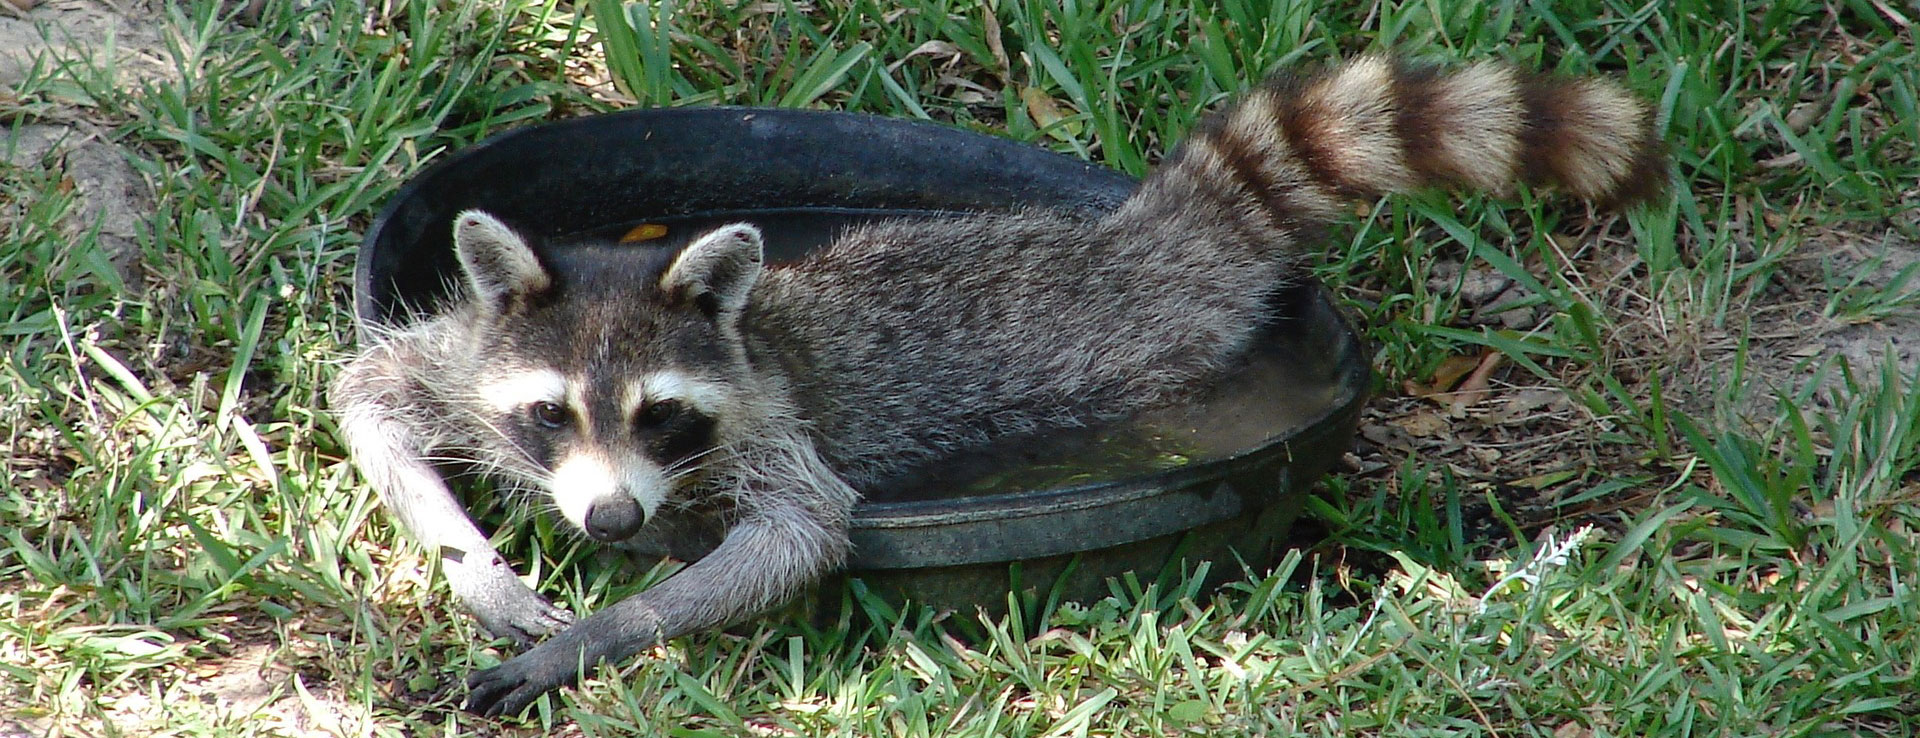 what to do when encountering raccoons in toronto